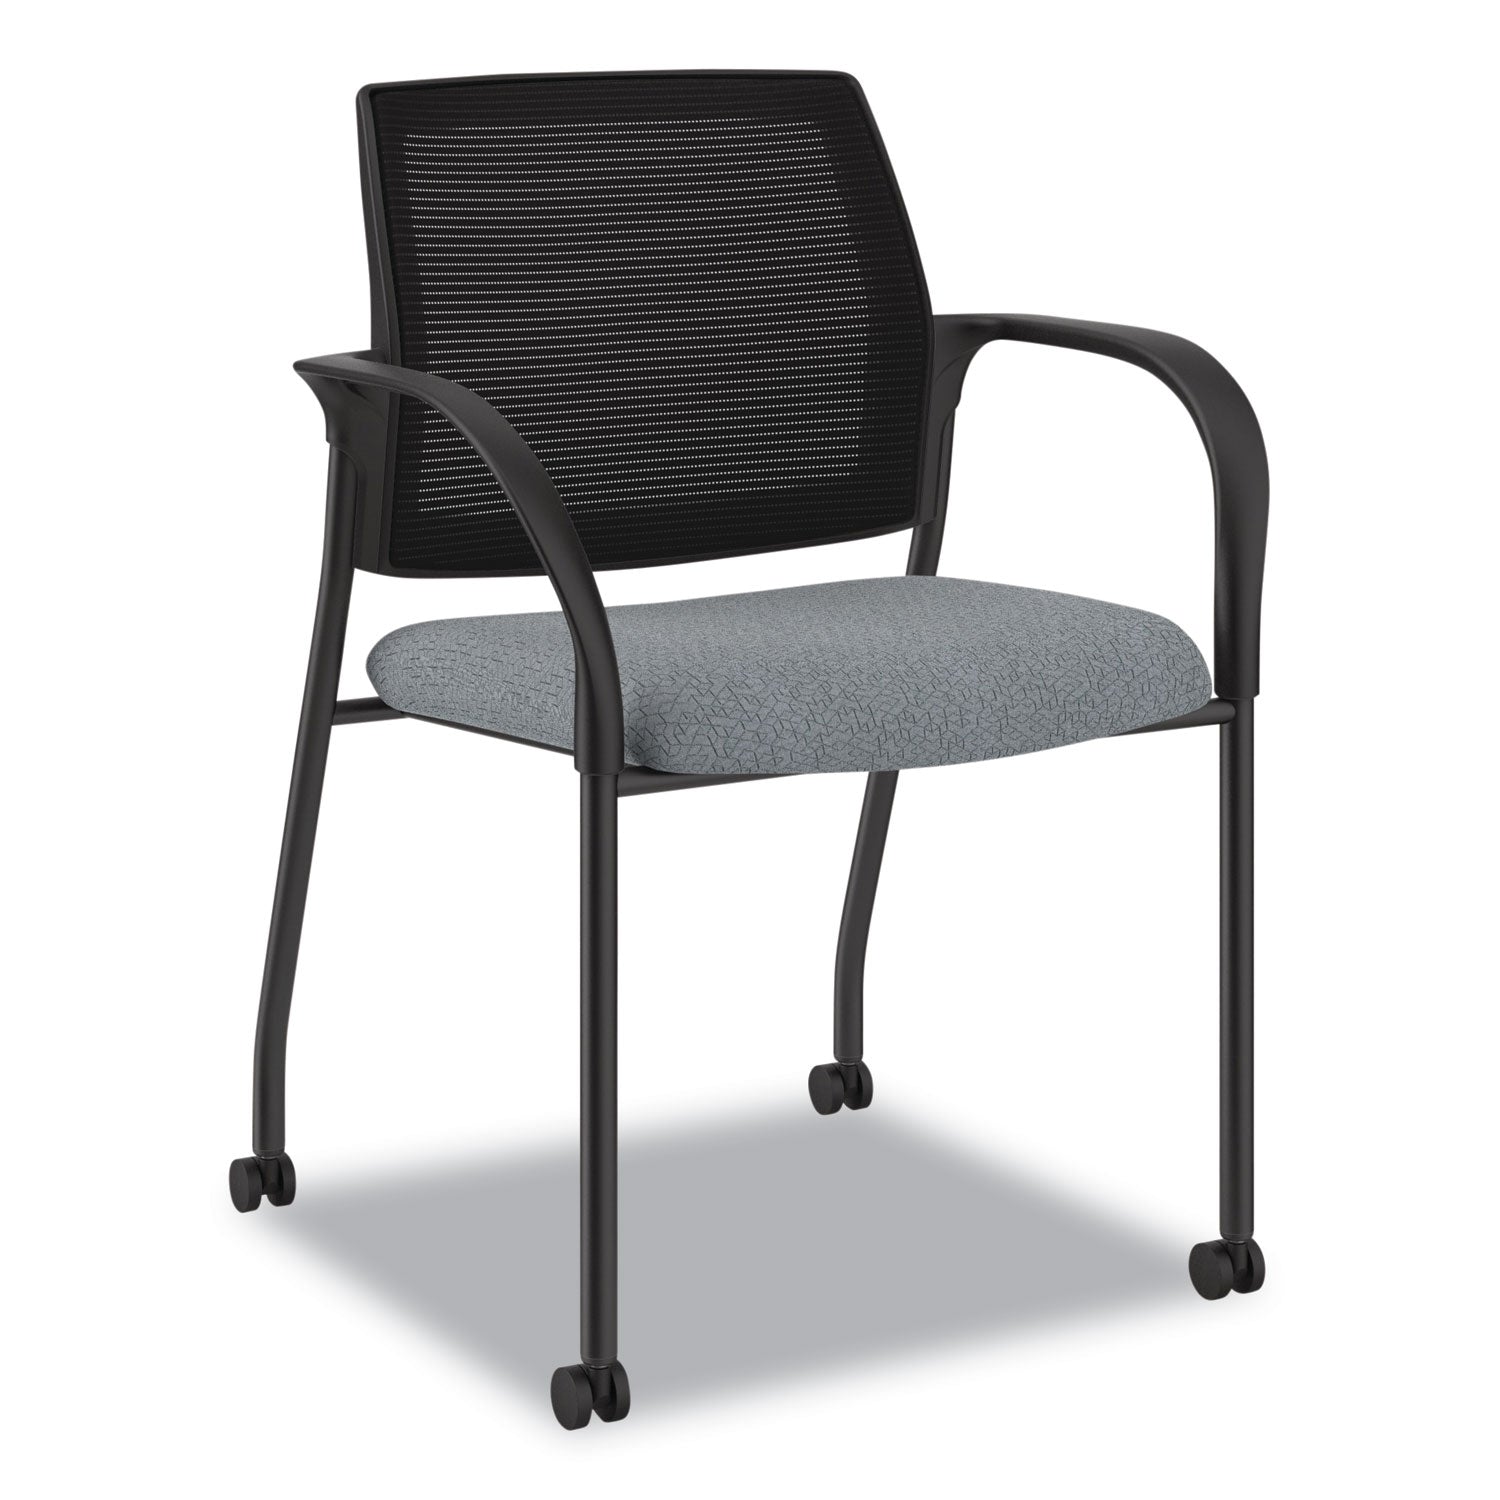 ignition-series-mesh-back-mobile-stacking-chair-fabric-seat-25-x-2175-x-335-basalt-black-ships-in-7-10-business-days_honis6fhimapx25 - 1